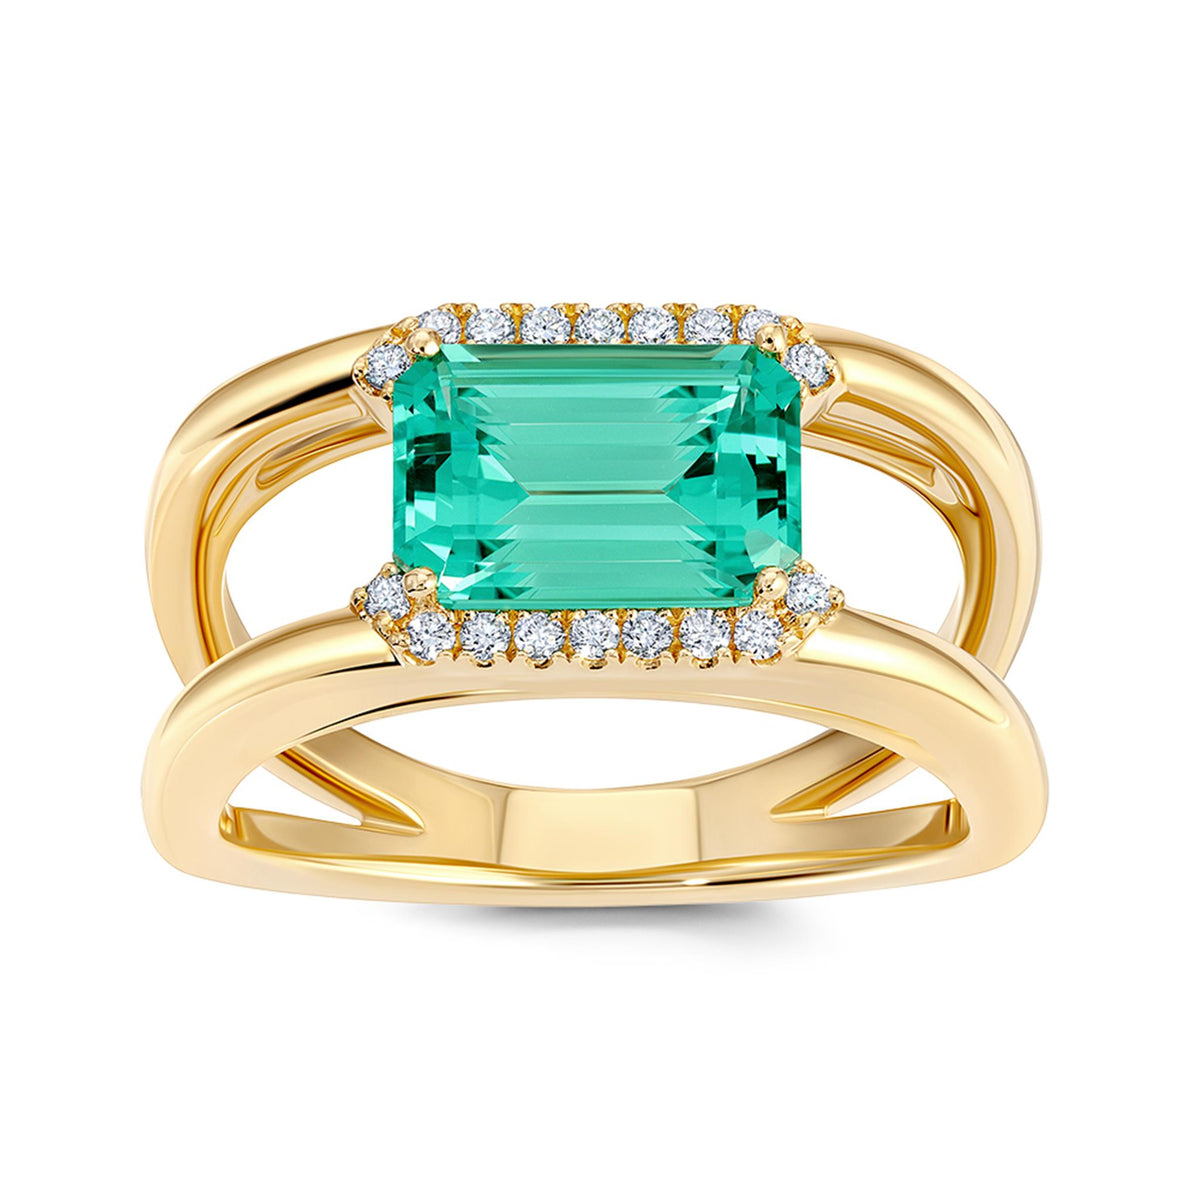 14Kt Yellow Gold Ring With 2.39ct Chatham Lab Created Mint Colored Chrysoberyl